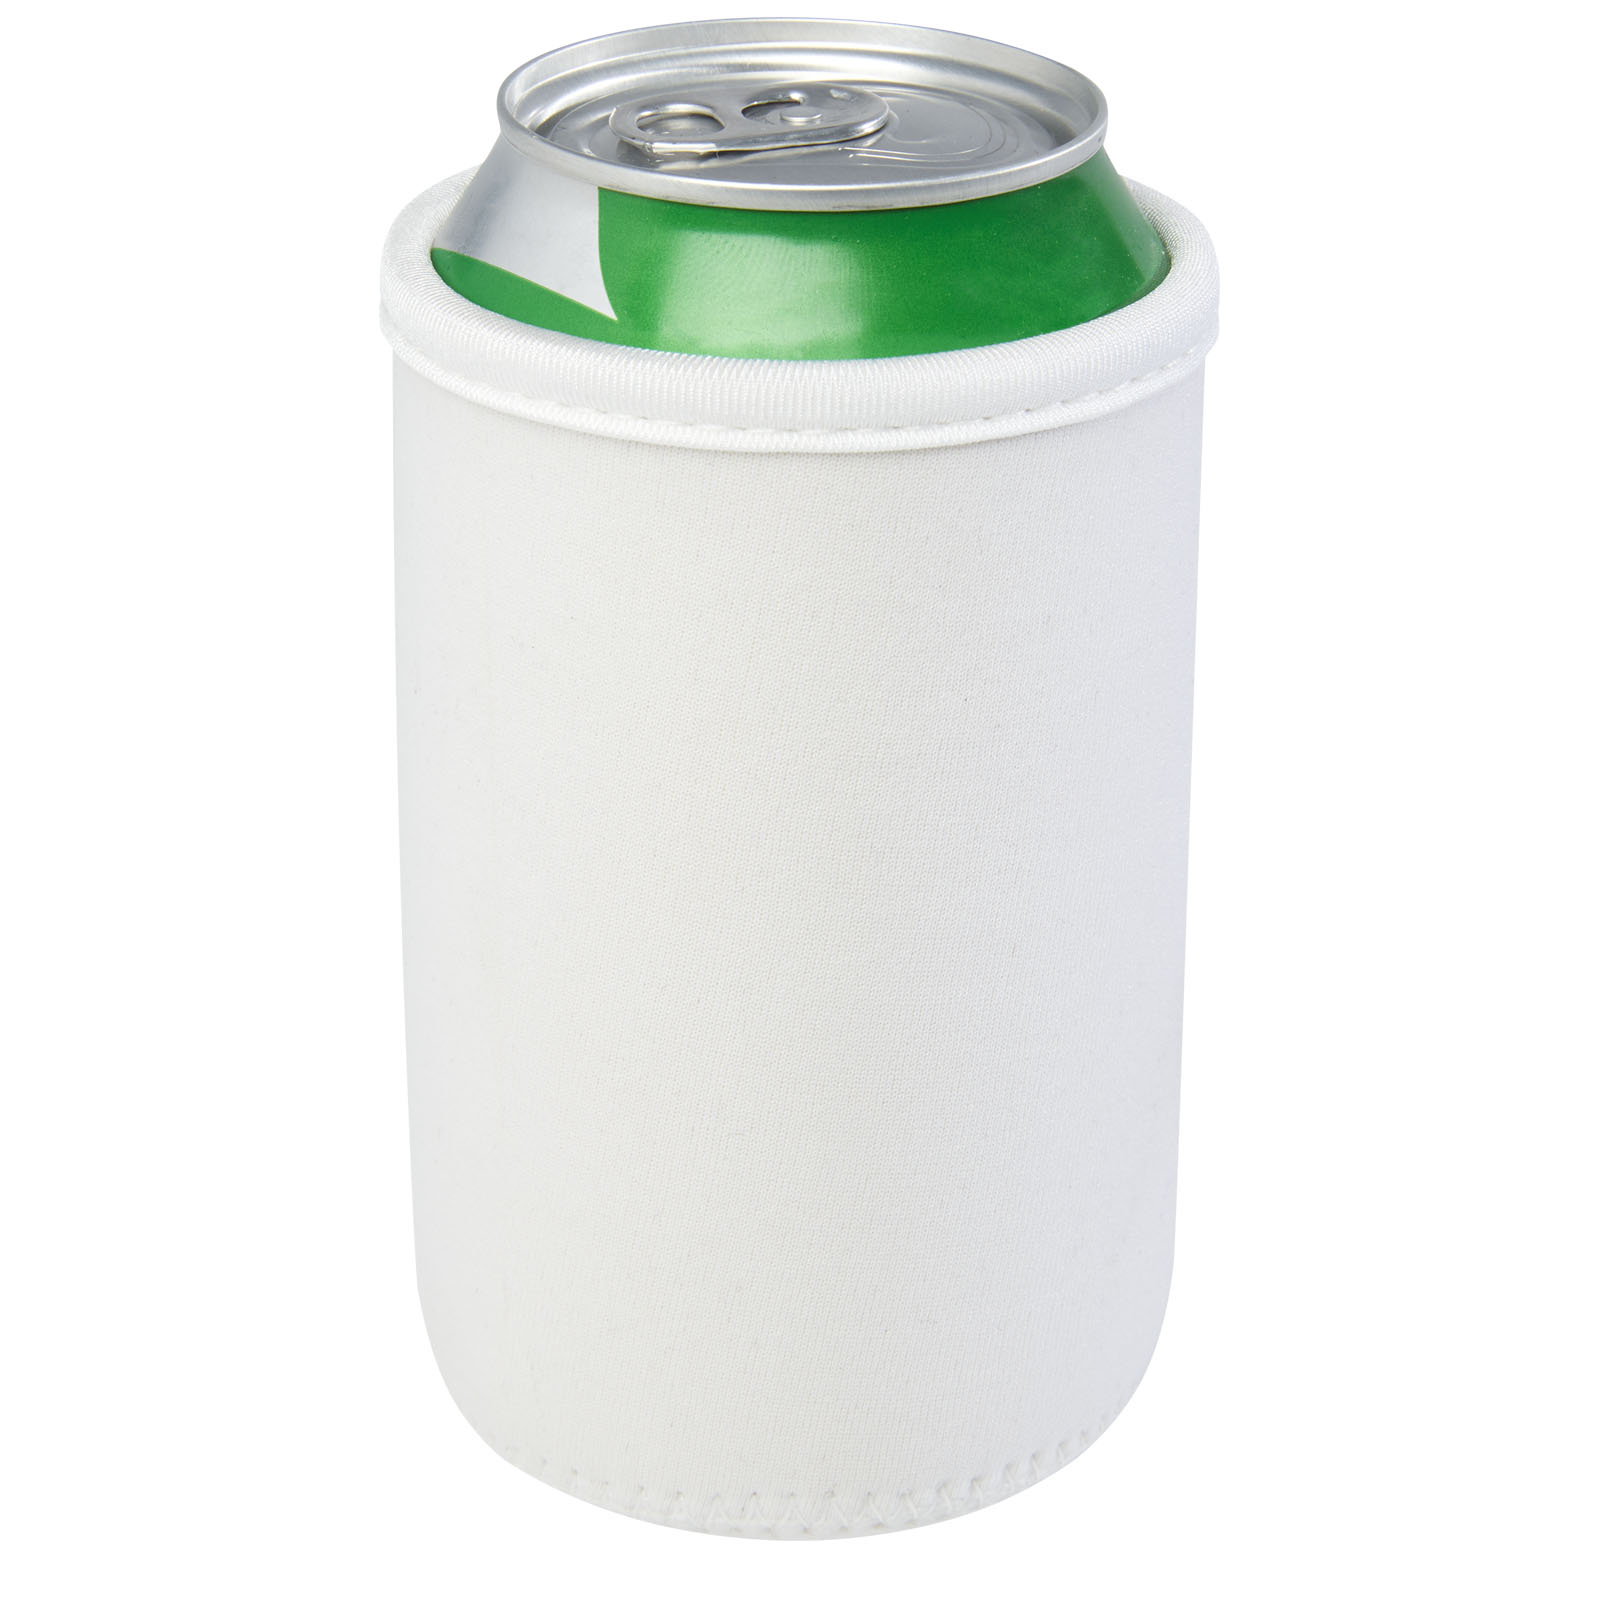 Advertising Cooler bags - Vrie recycled neoprene can sleeve holder - 0